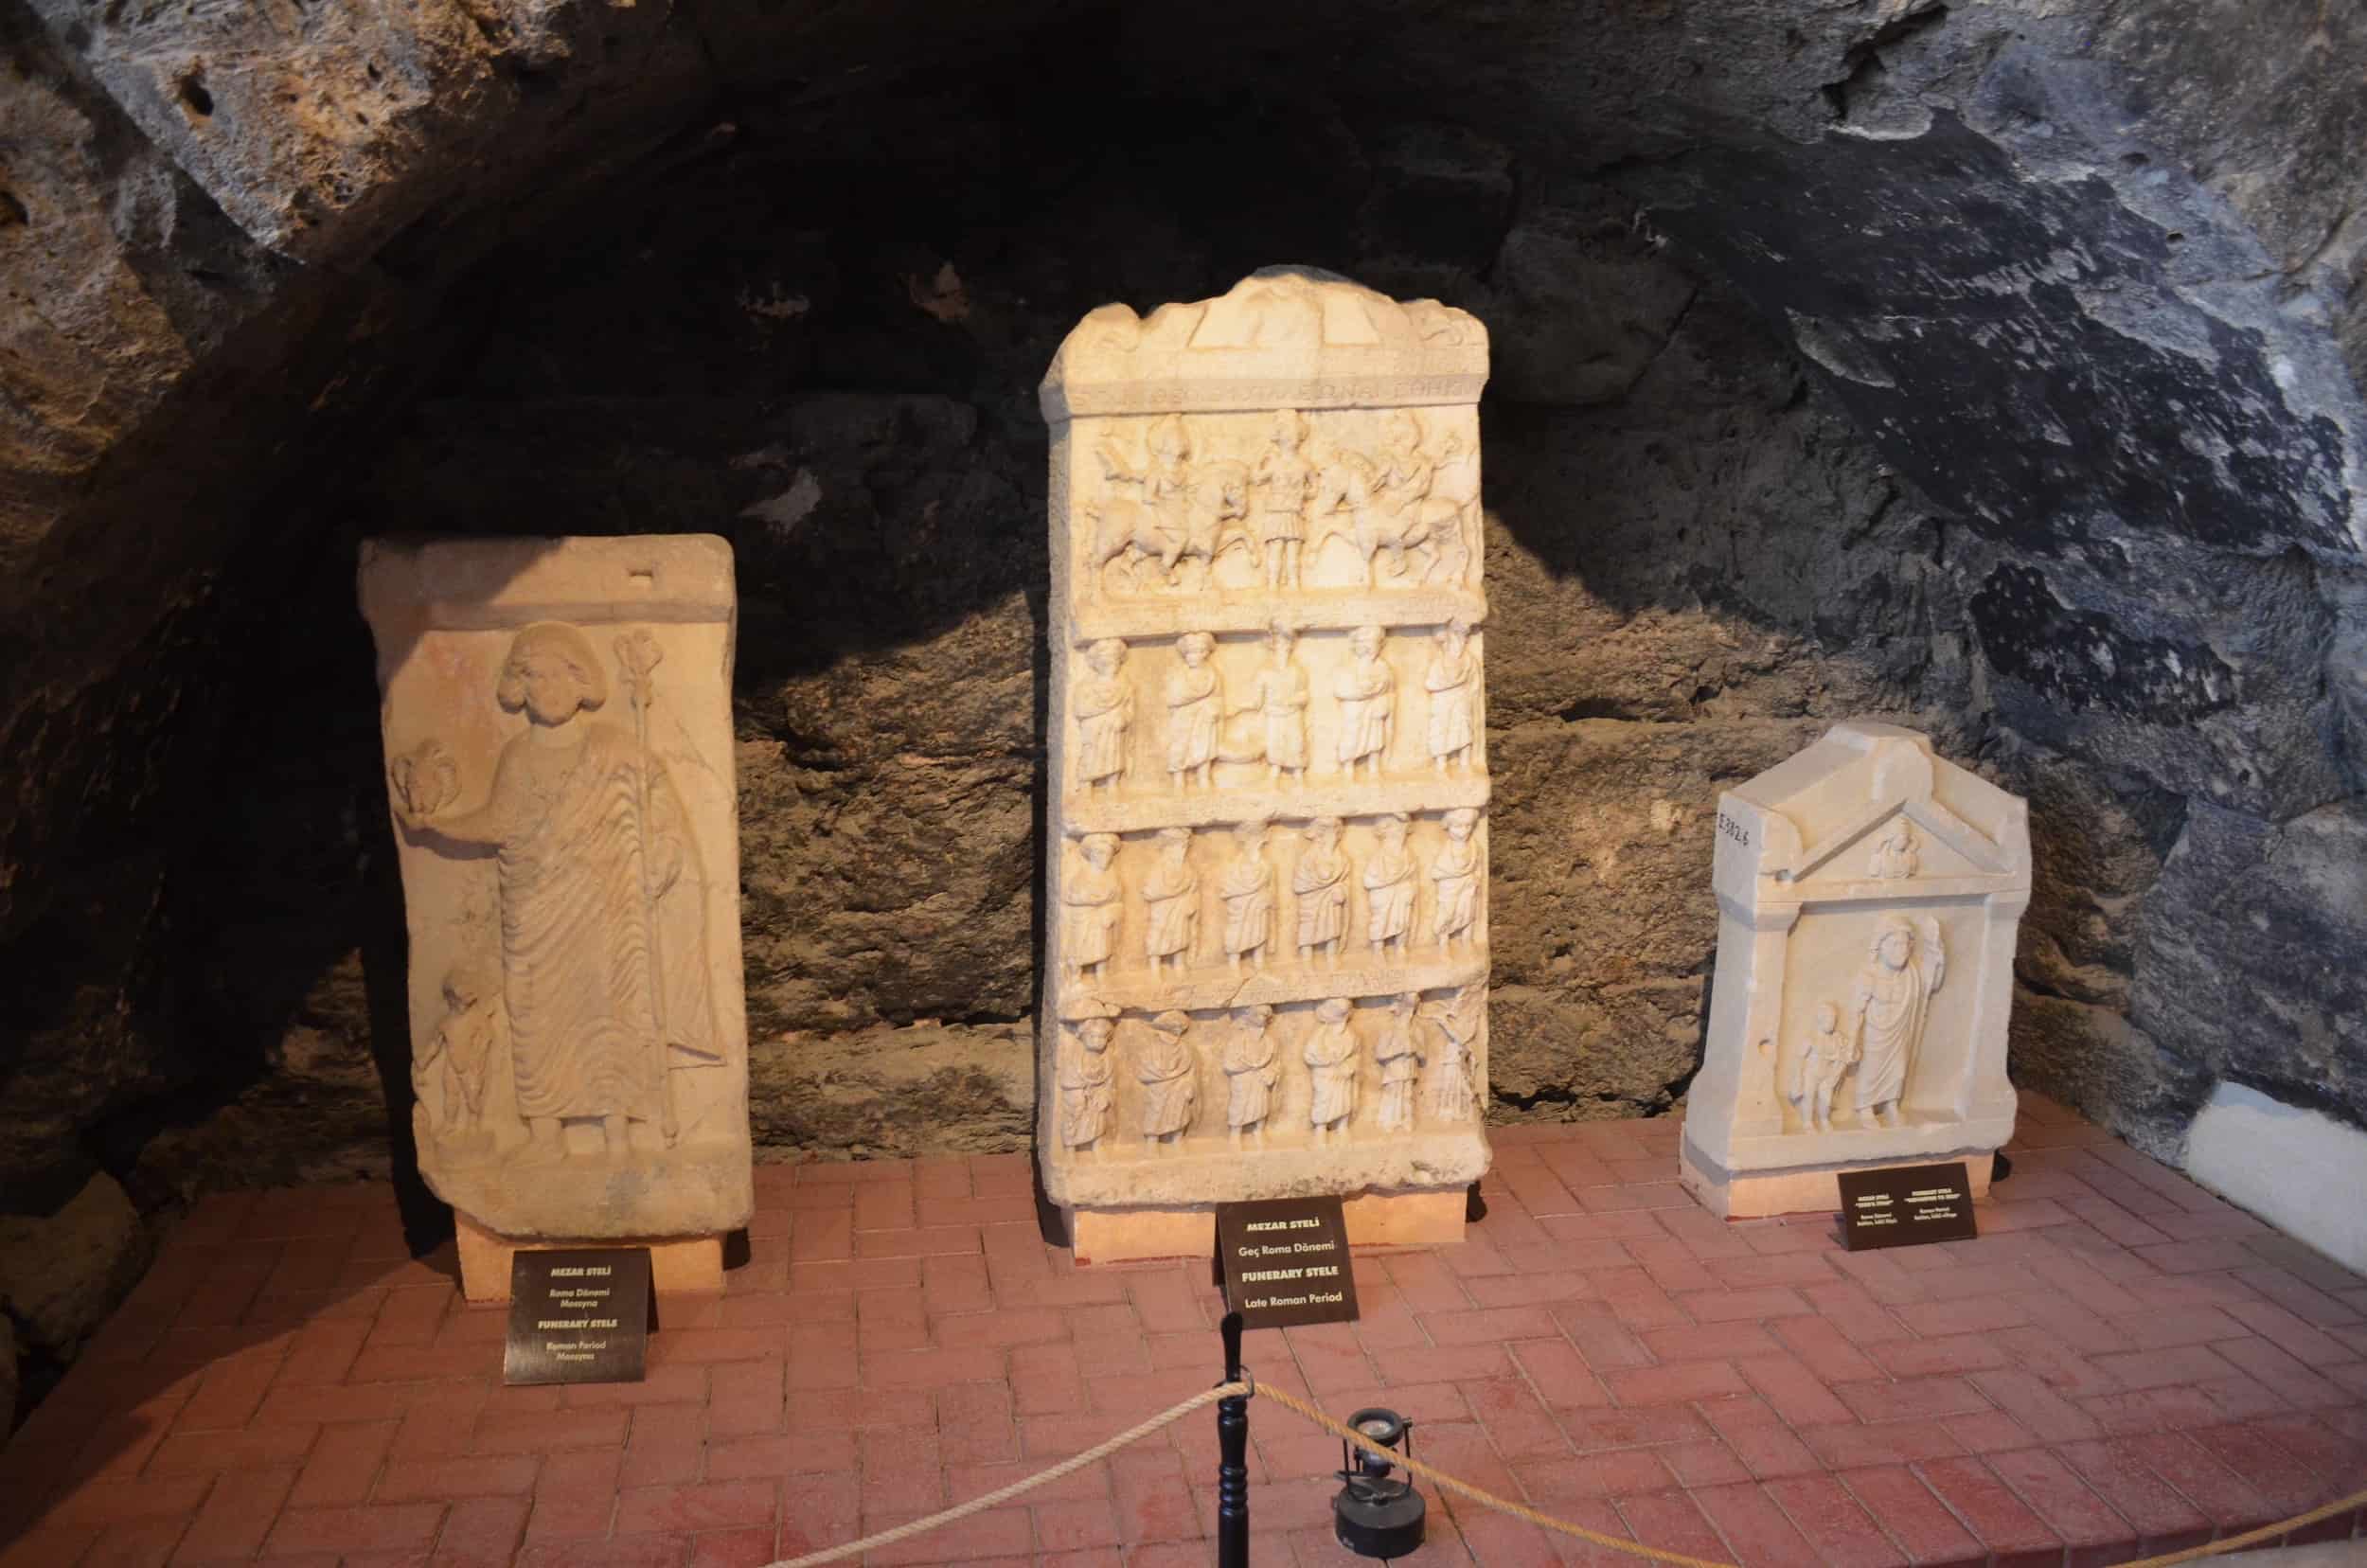 Funeral stelae from the Roman period